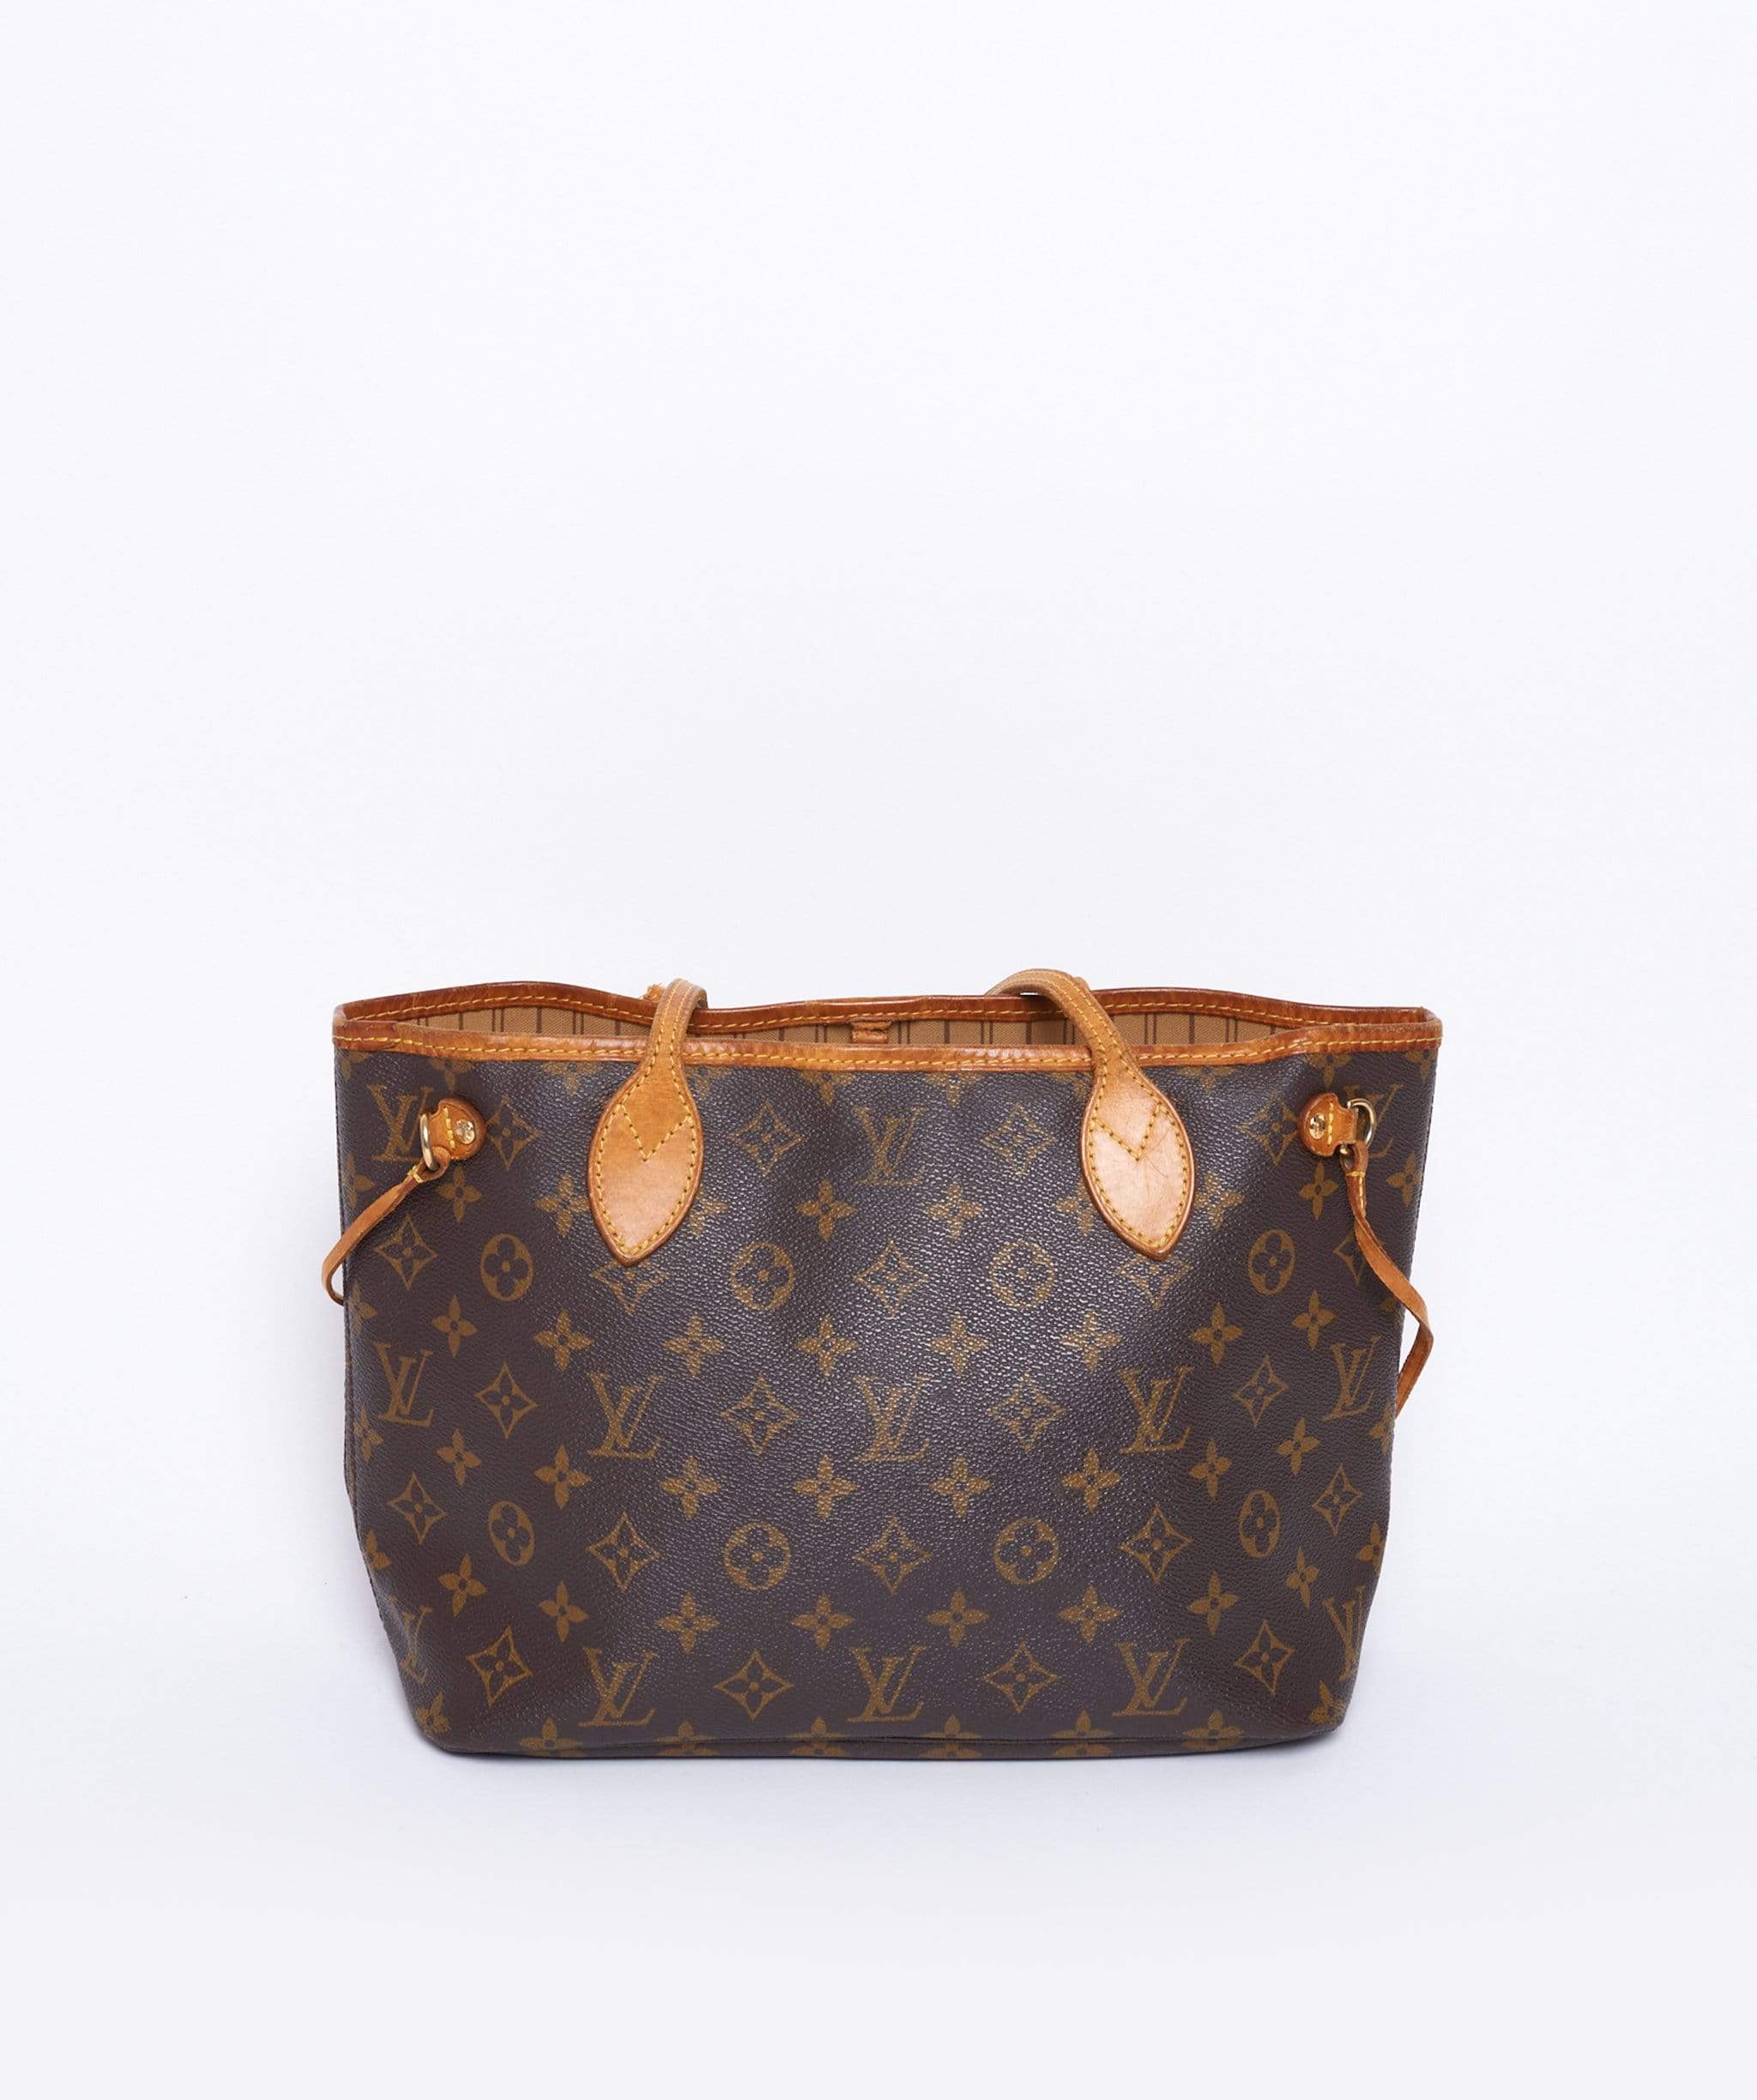 Louis Vuitton Neverfull Bags for sale in Rotterdam, Netherlands